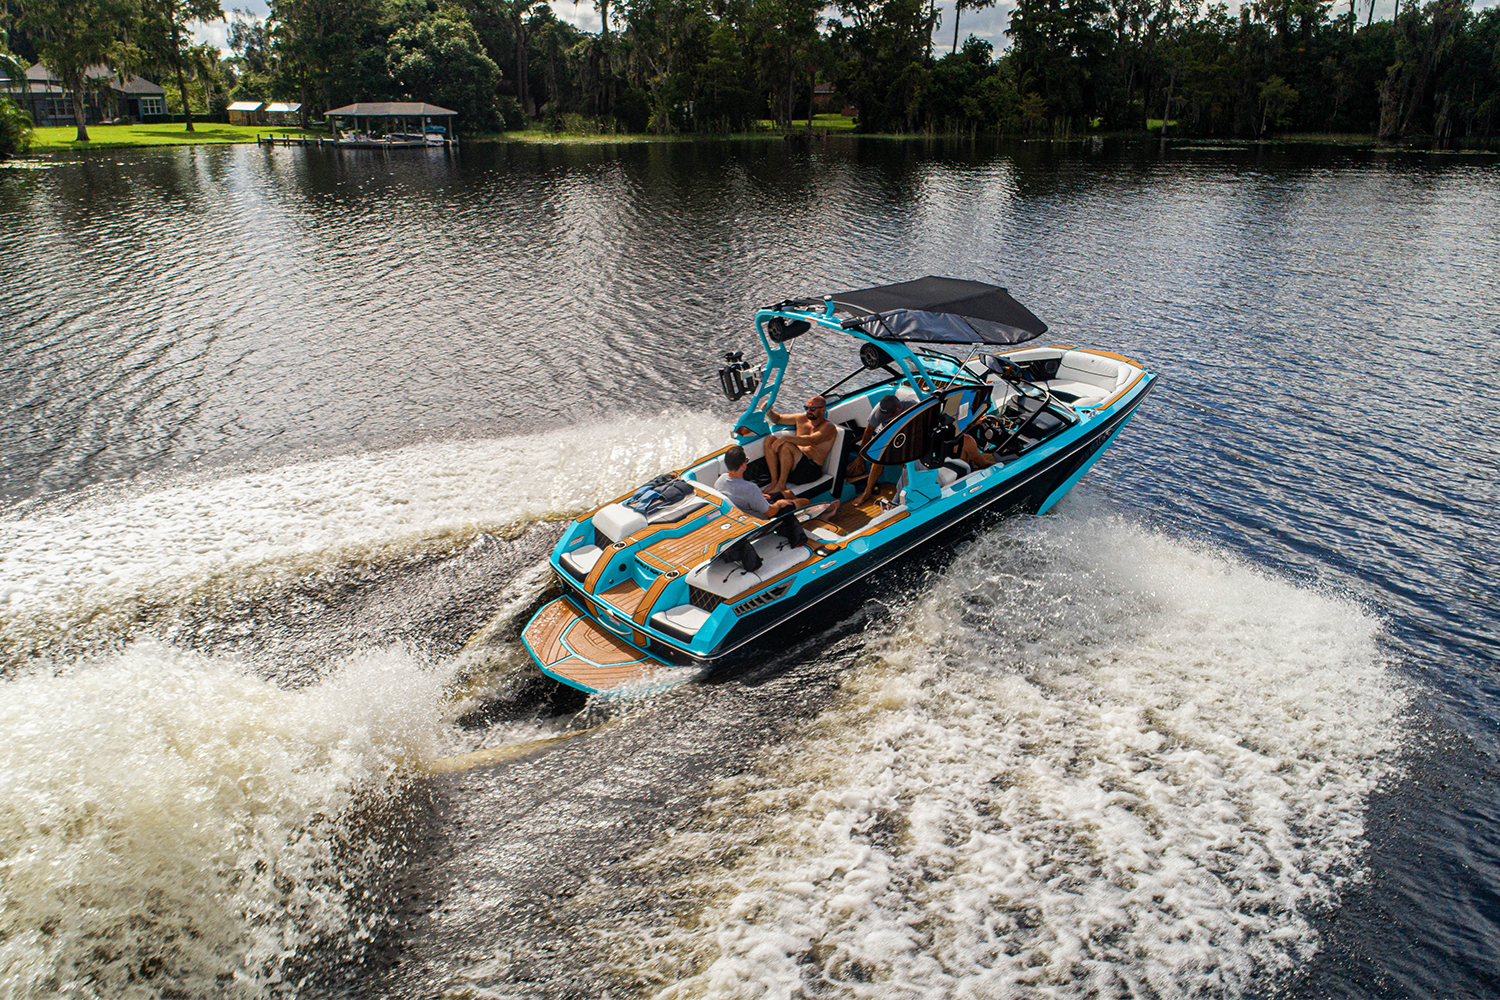 The Super Air Nautique GS22E, an electric towboat from Correct Craft, out on the water. It features technology from Watershed Innovations and Ingenity Electric.